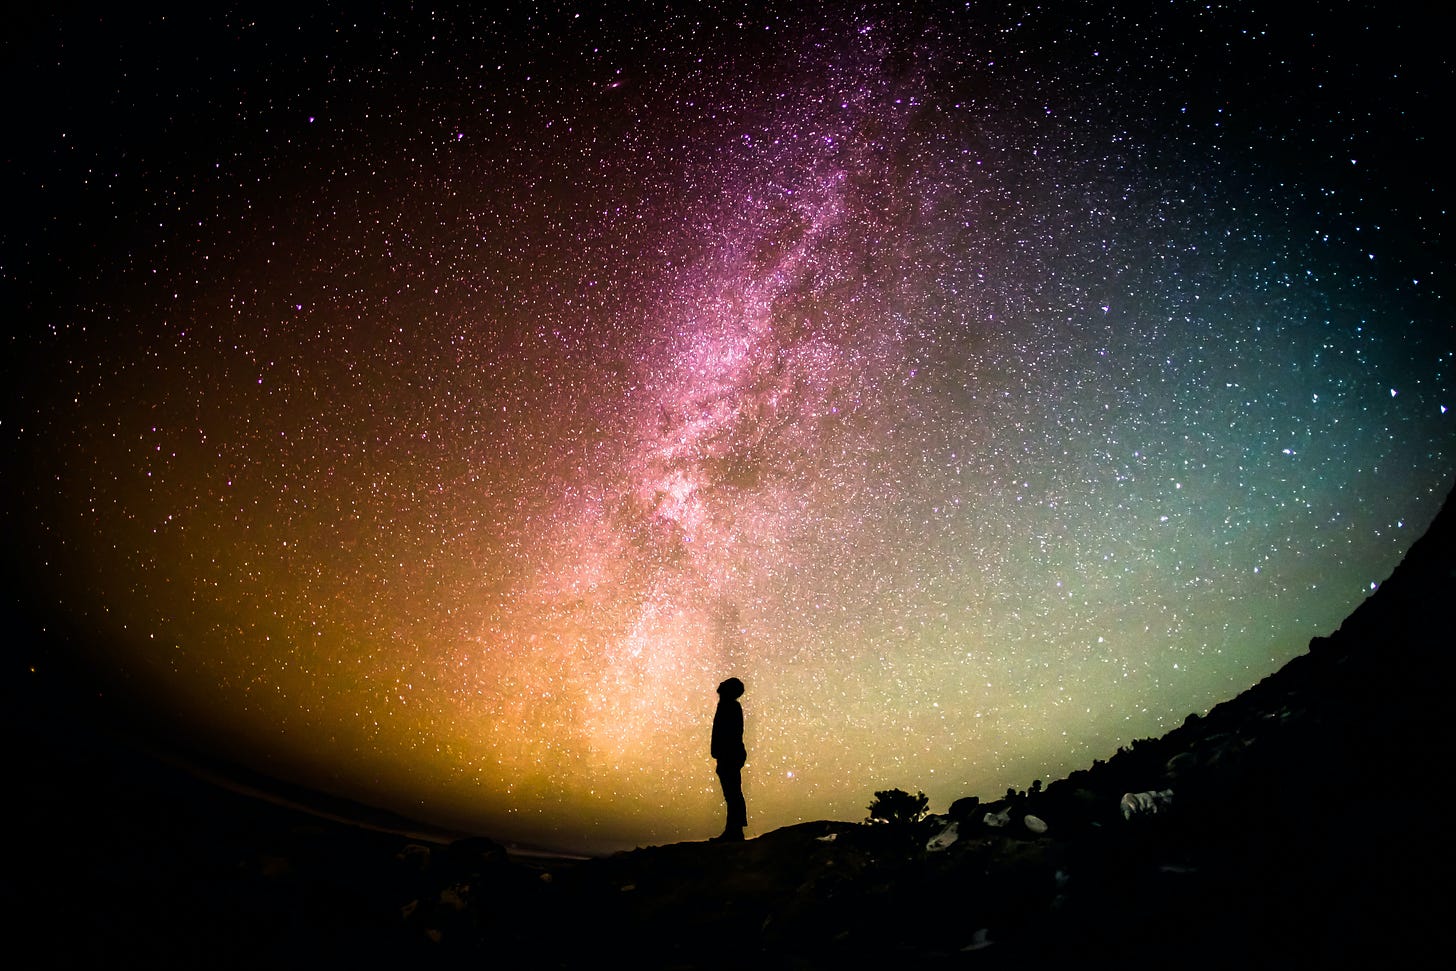 A person standing on a slope looking at the Milky Way and stars in the night sky.